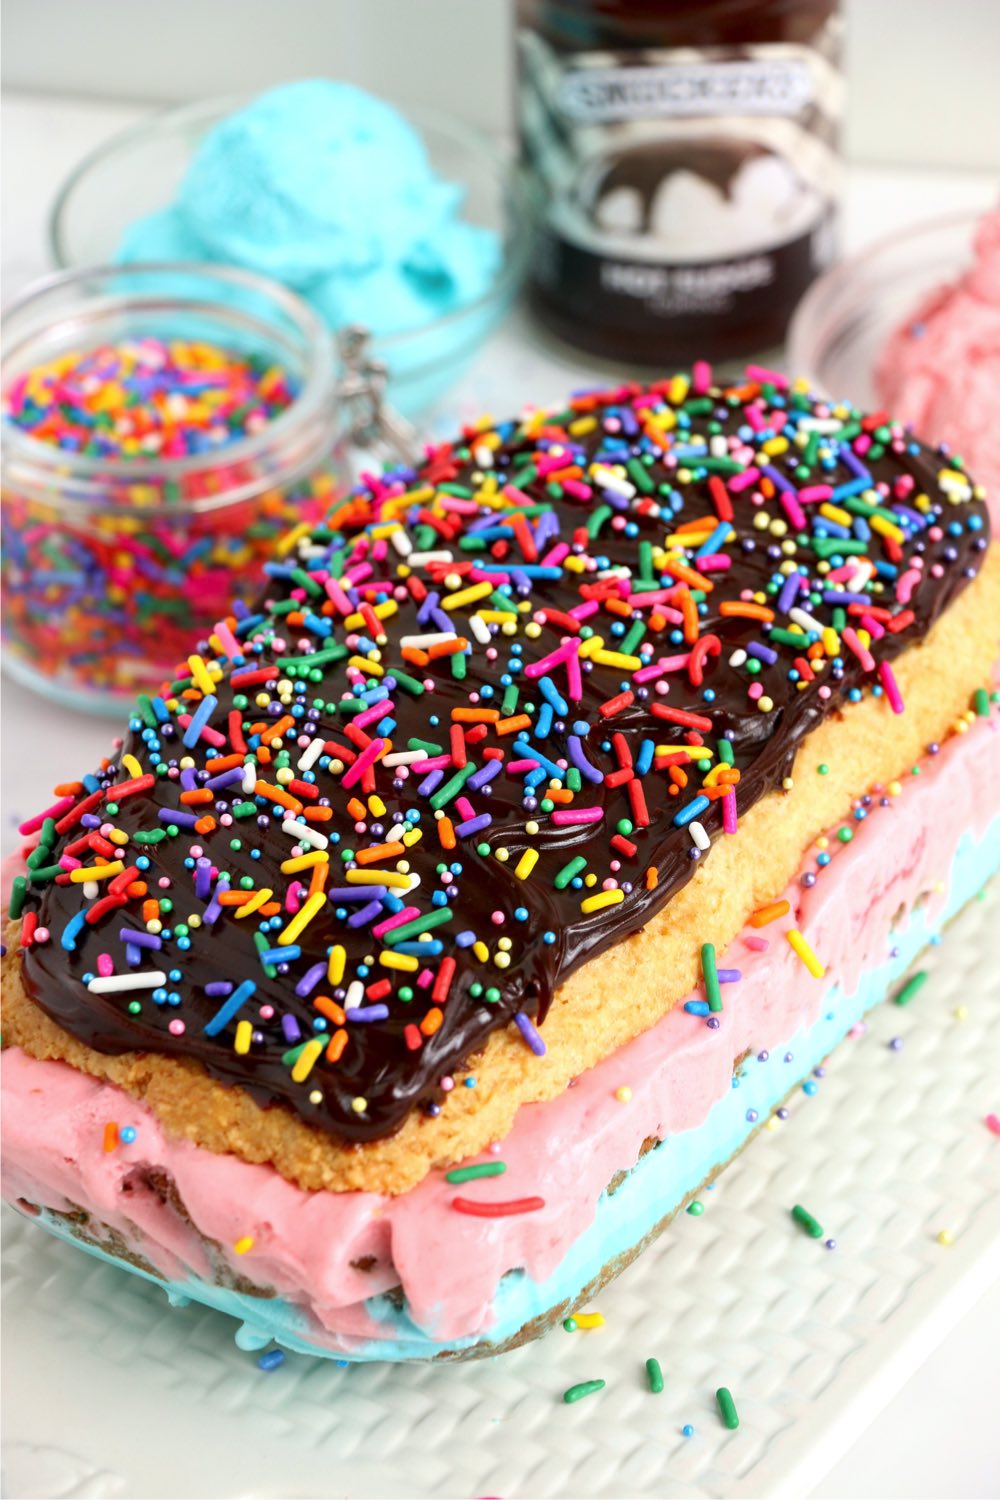 layered cake with ice cream, fudge and sprinkles